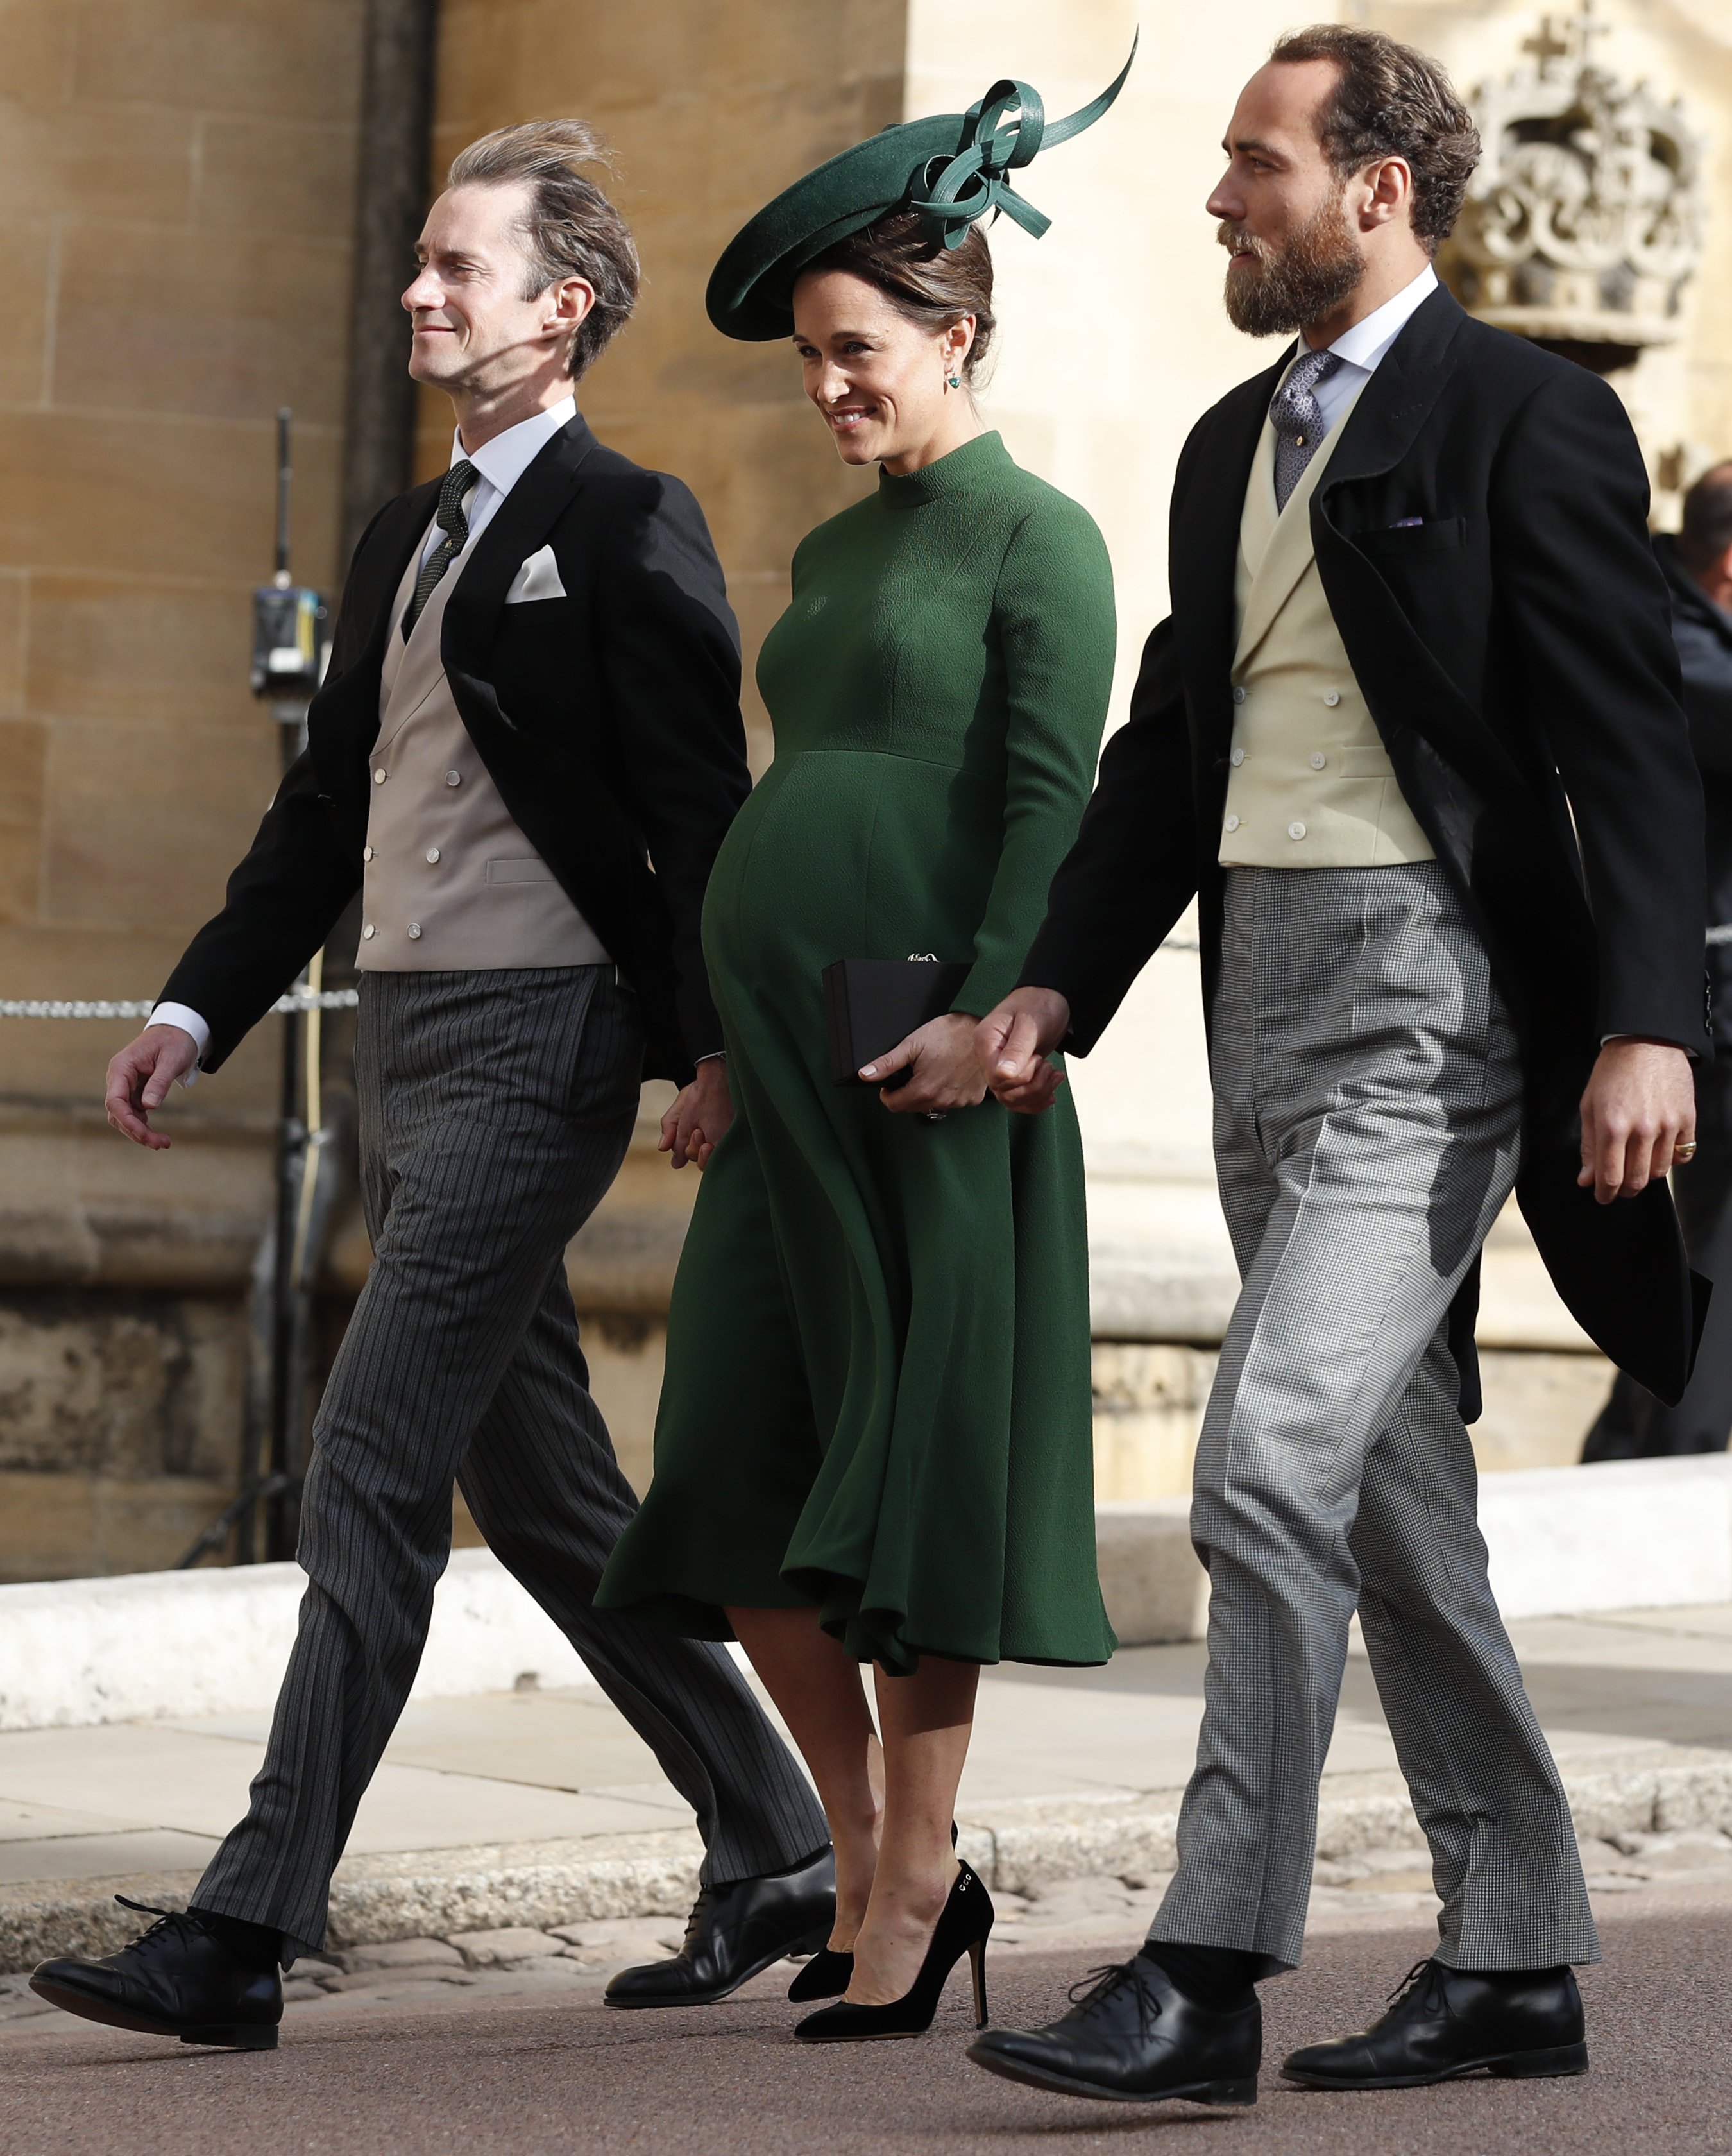 James Middleton, Pippa Middleton and James Matthews arrive for the wedding of Princess Eugenie of York | Source: Getty Images